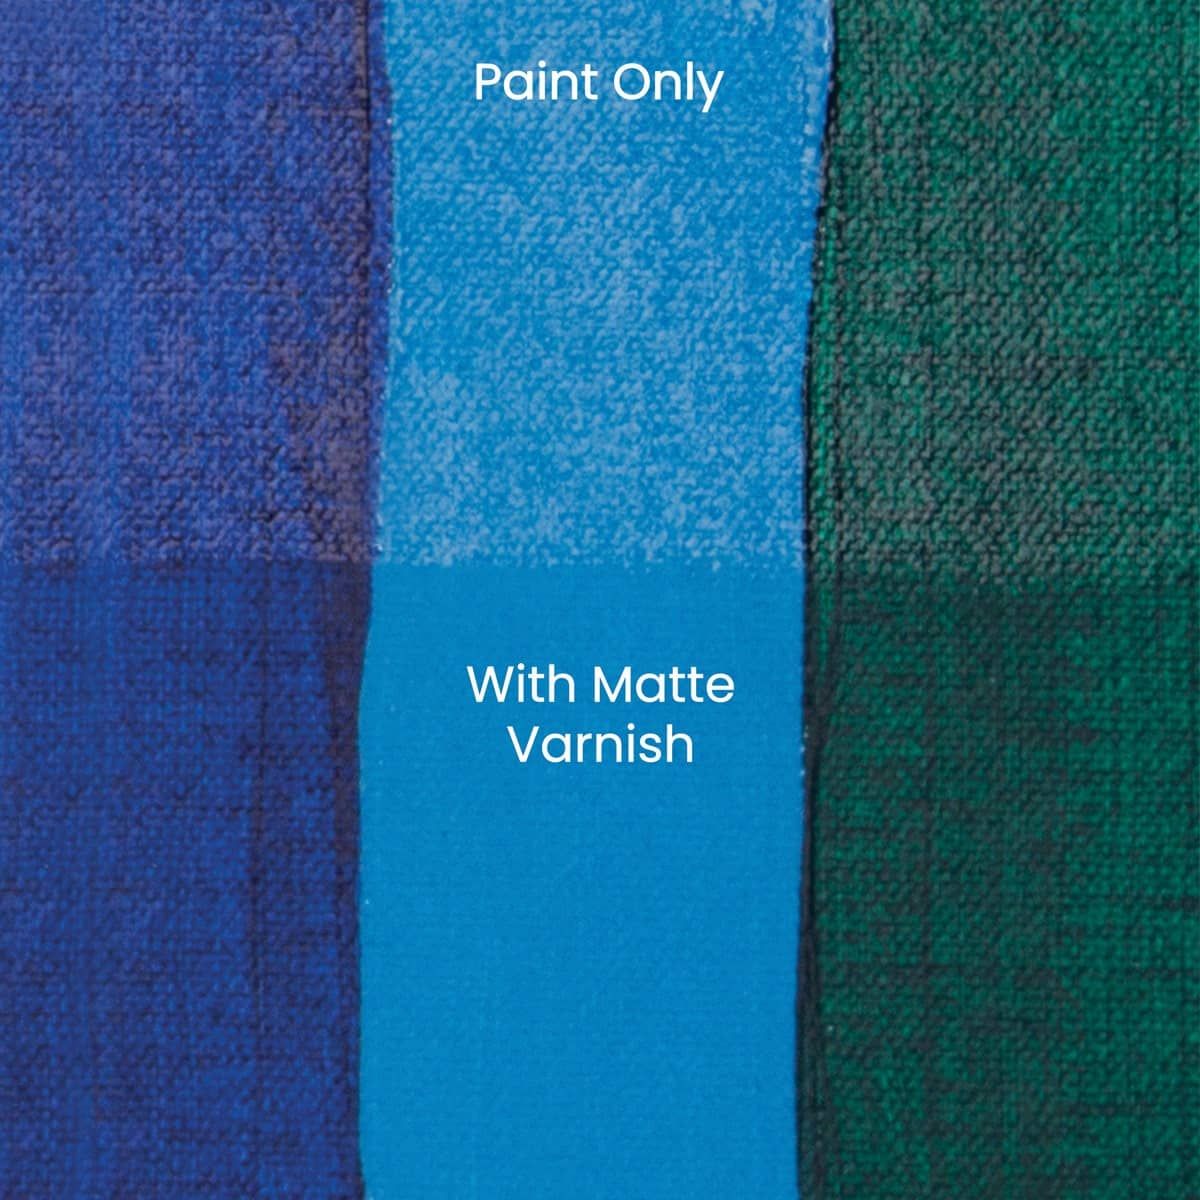 example of paint used with & without Matte Varnish